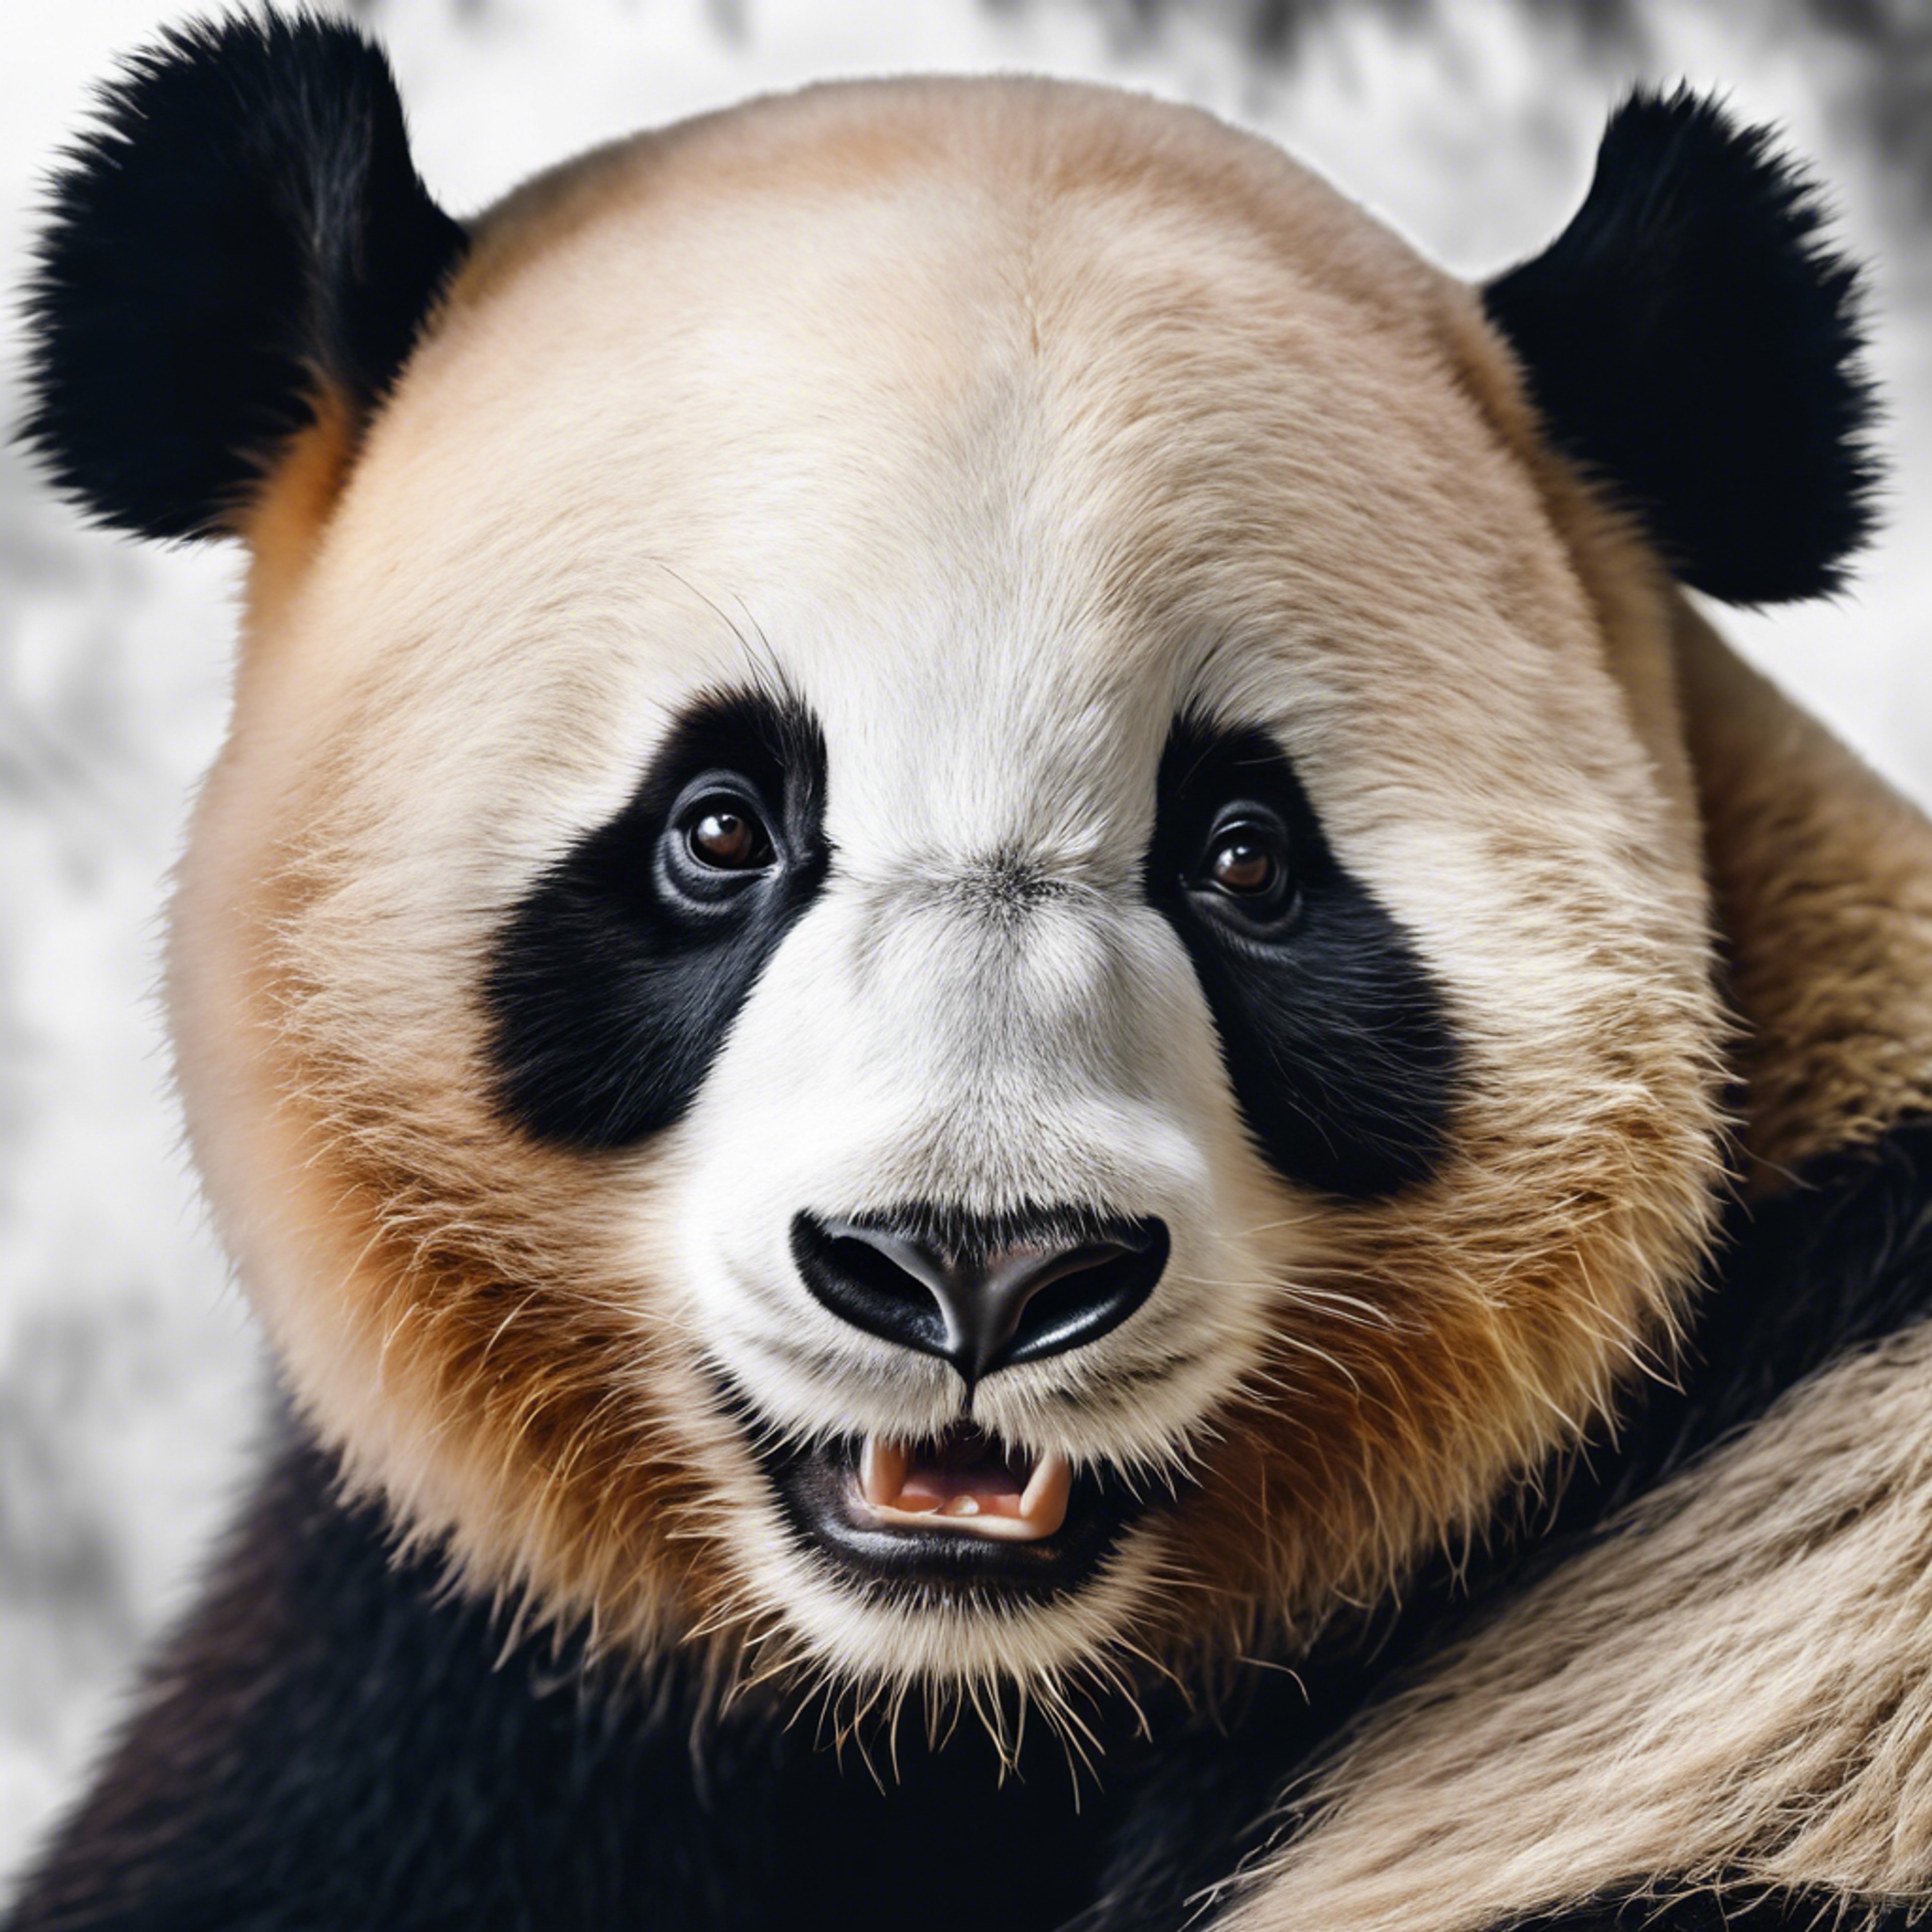 A close-up portrait of a smiling panda, showcasing the joy and charm of this magnificent creature. Tapet[5b22781787714e61bfbc]